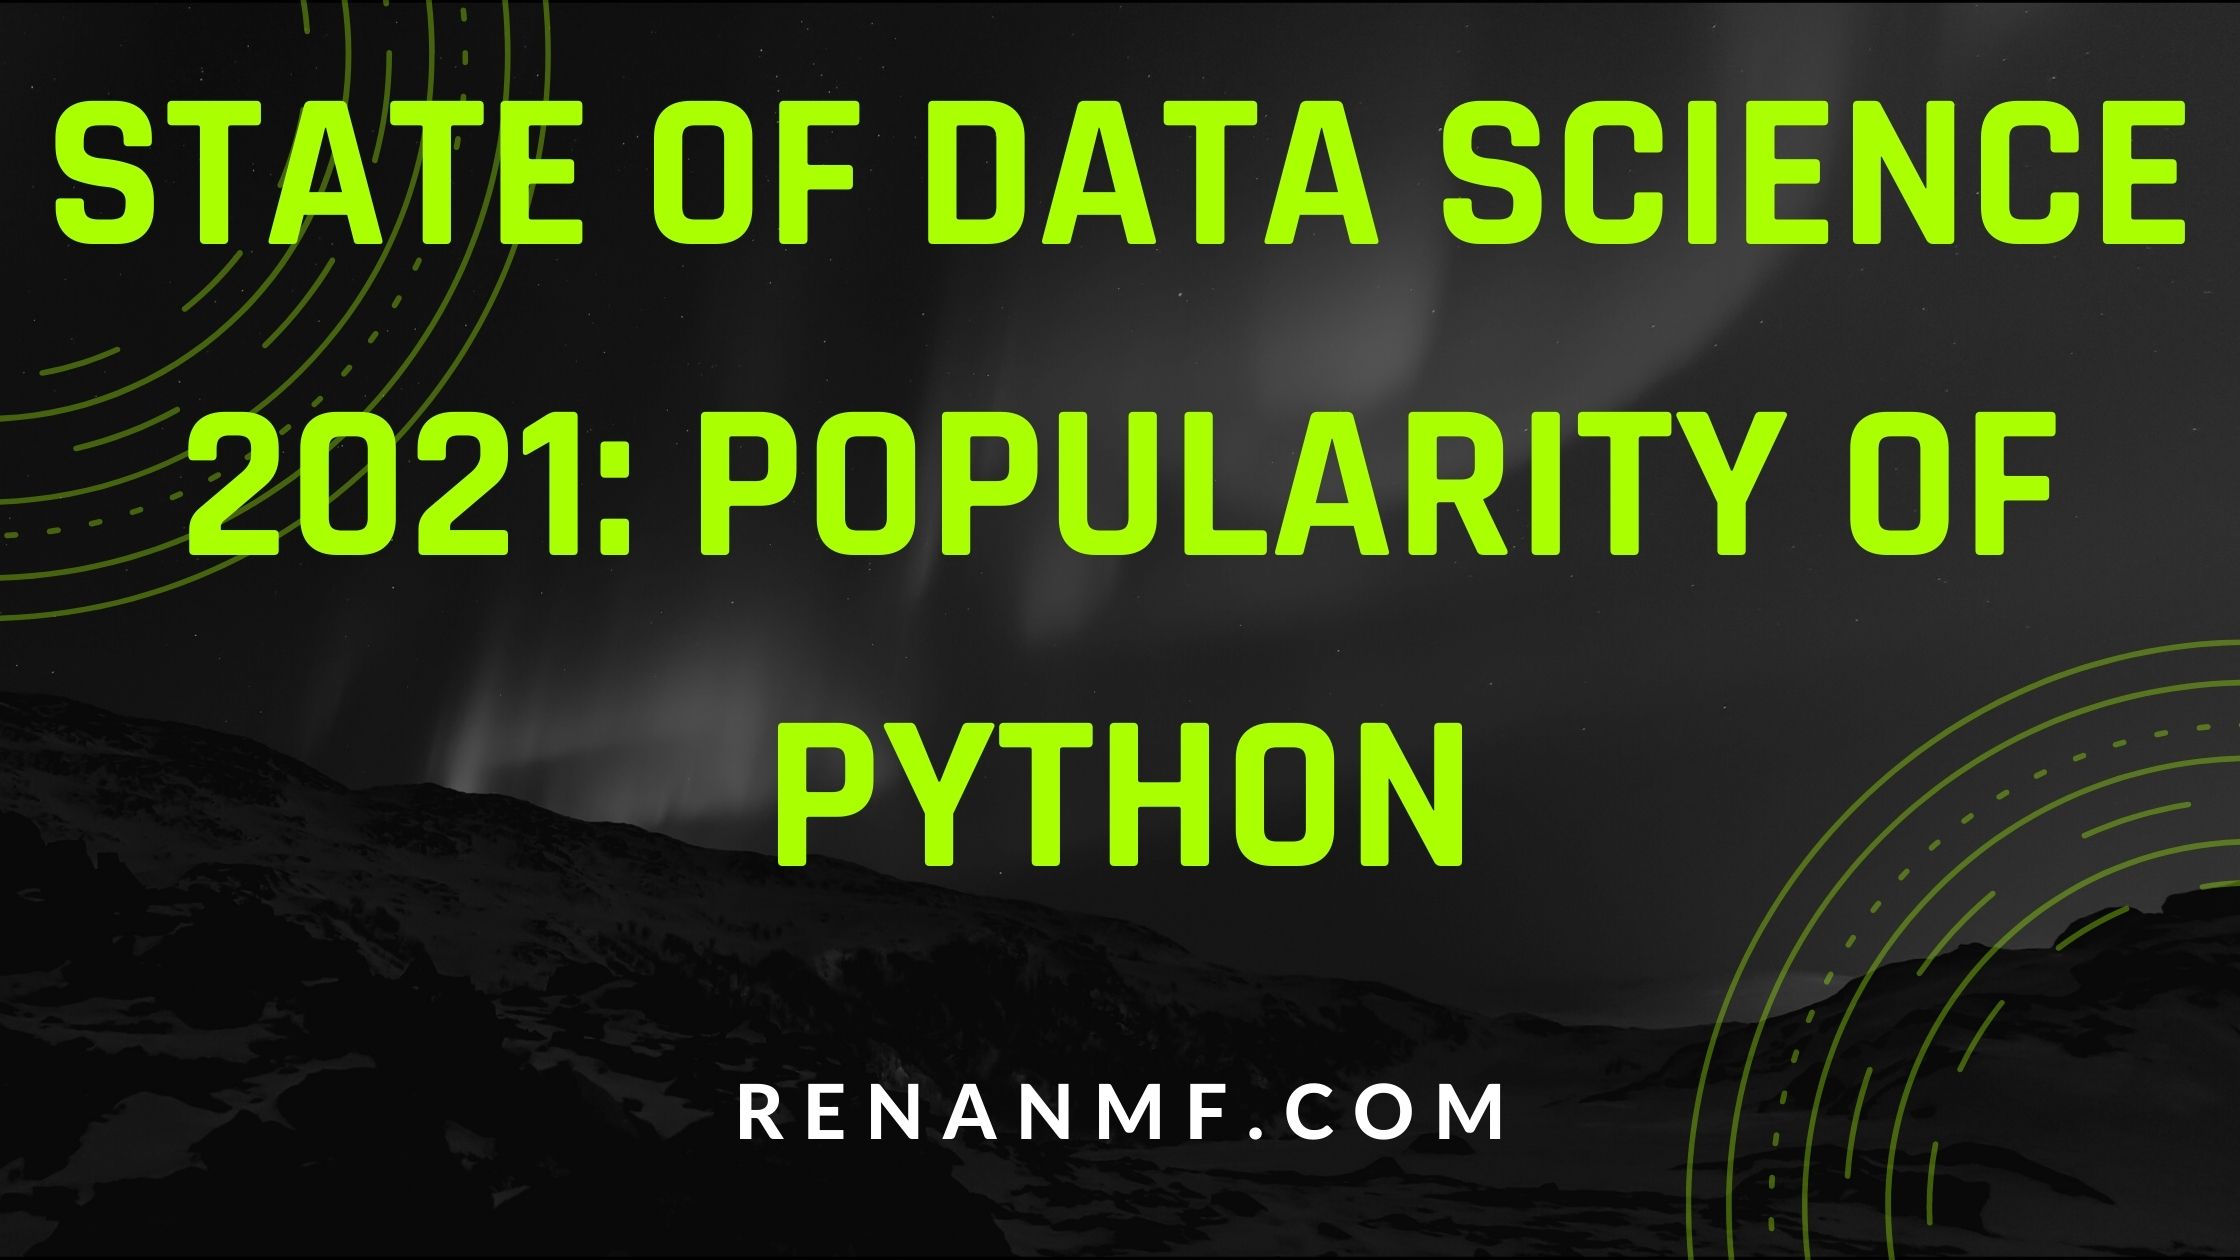 State Of Data Science 2021 Popularity Of Python 9438